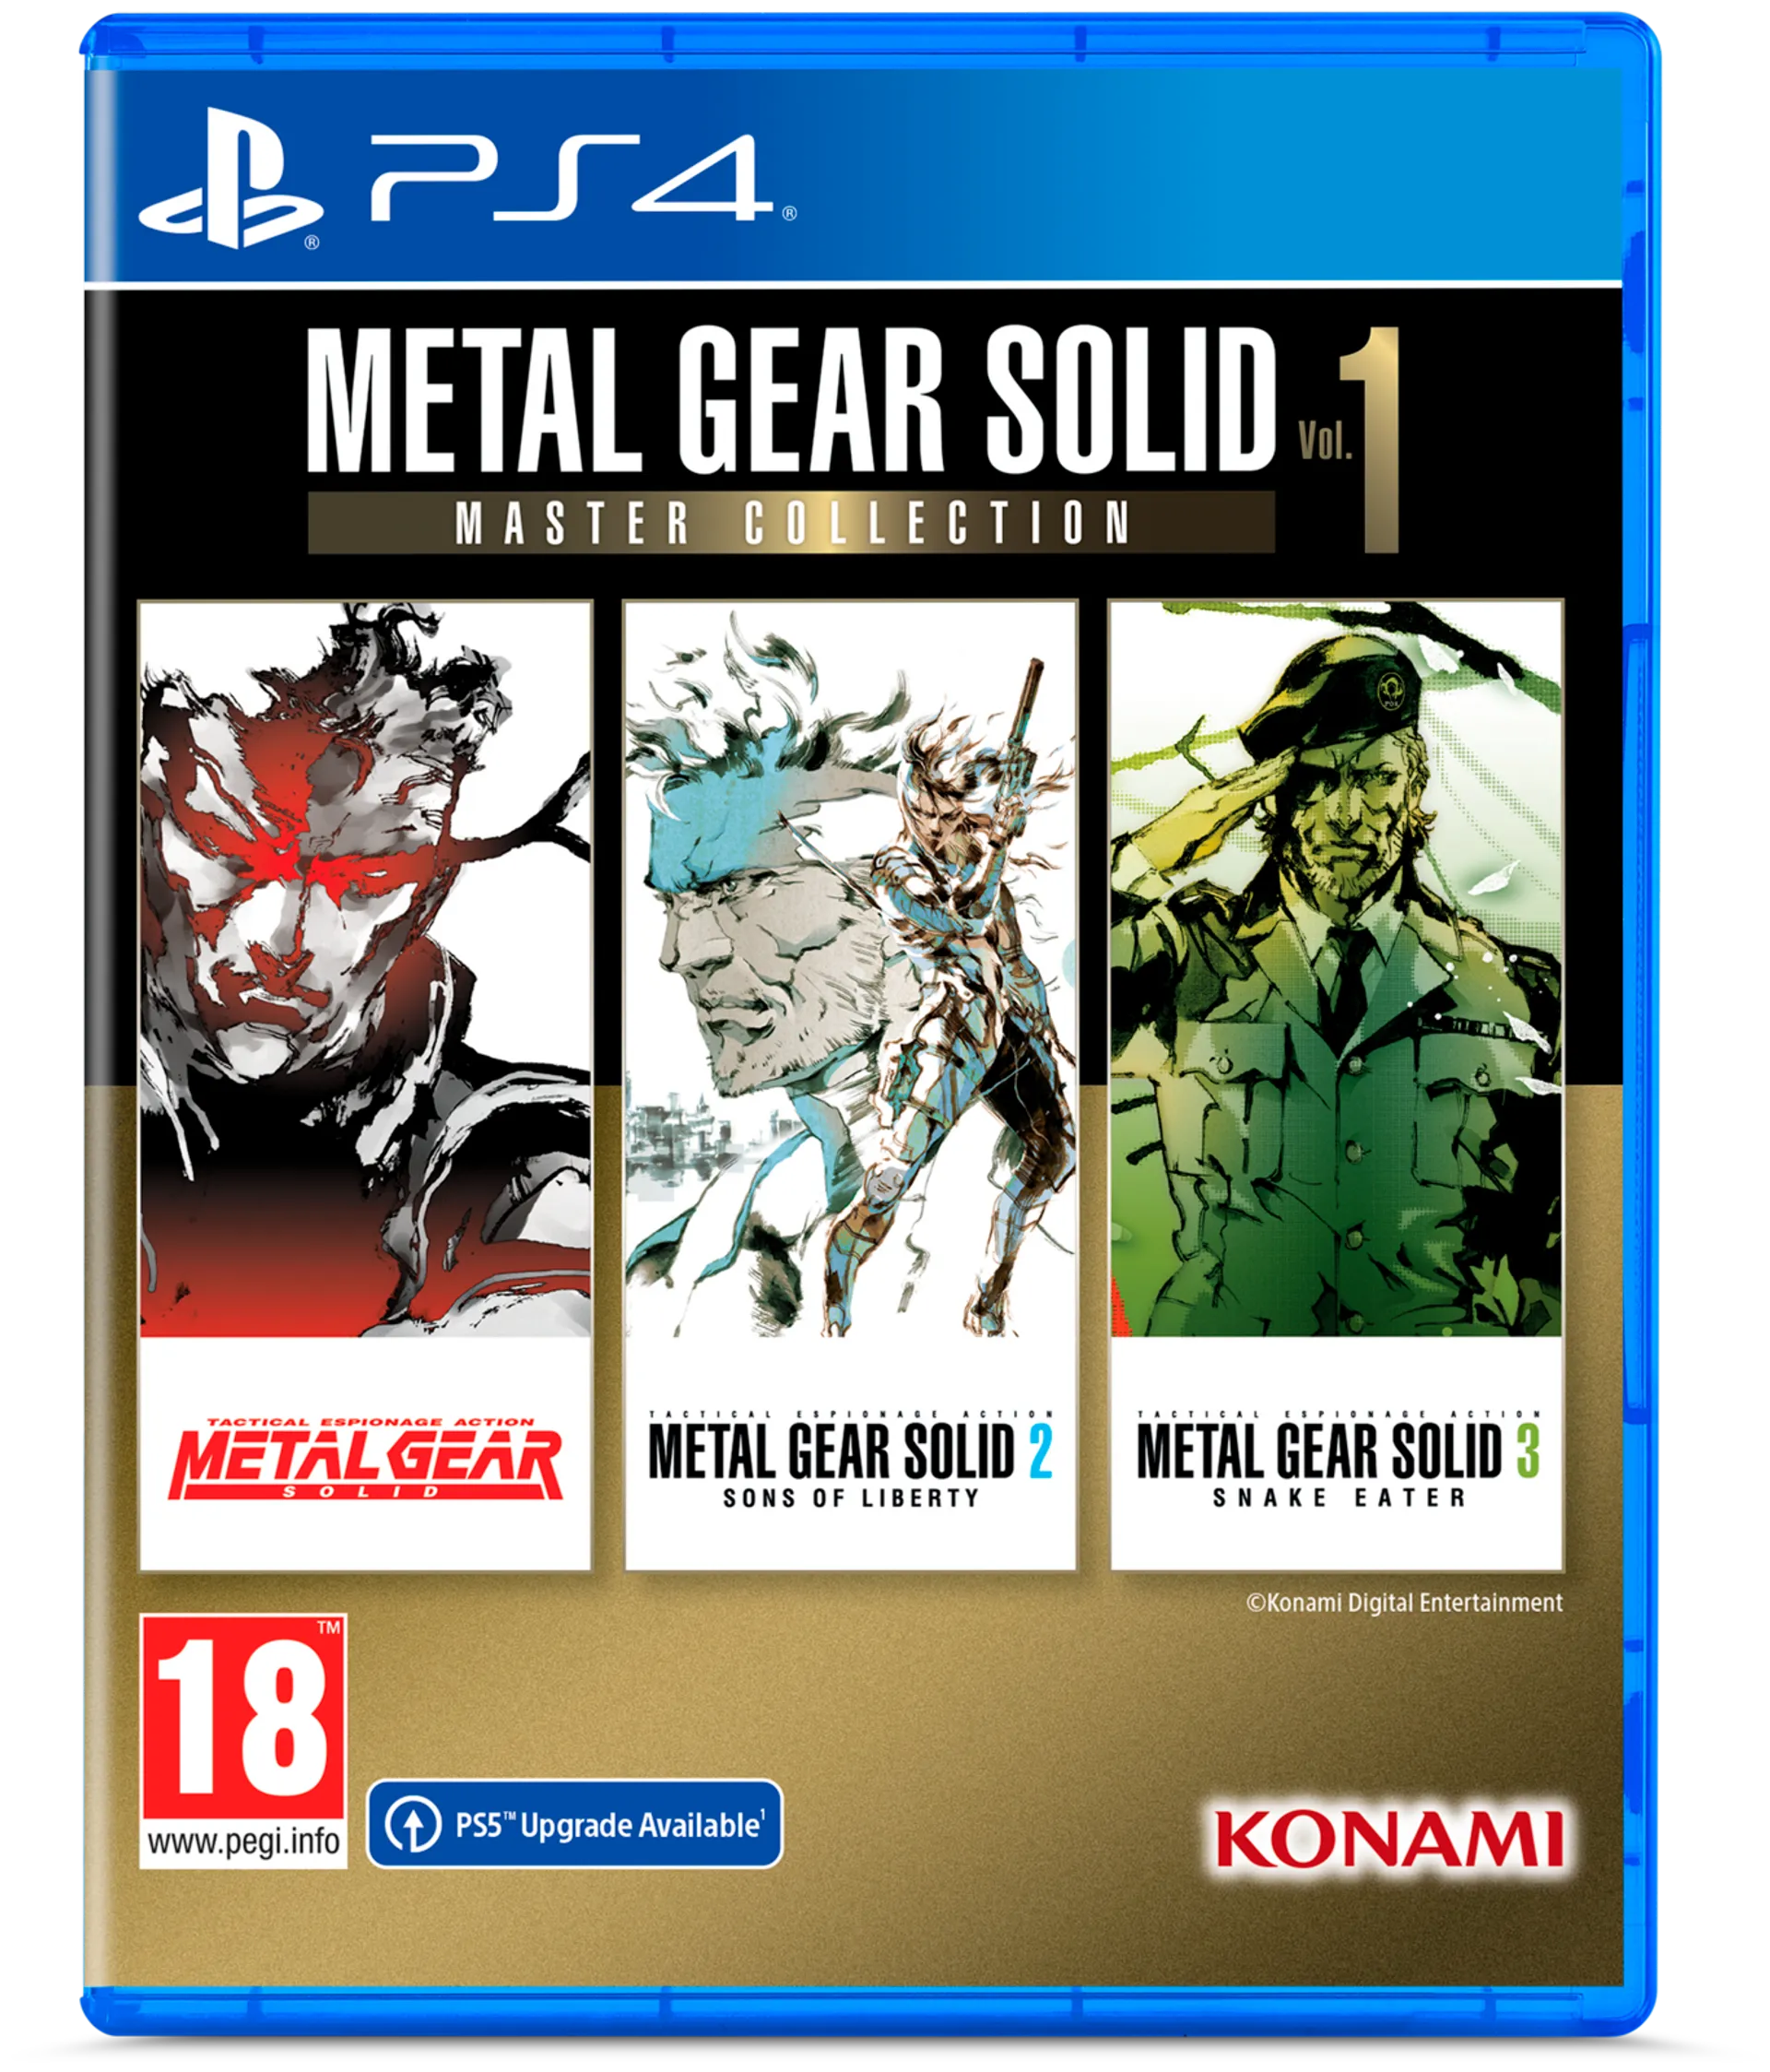 PS4 Metal Gear Solid Master Collection 1 - 1